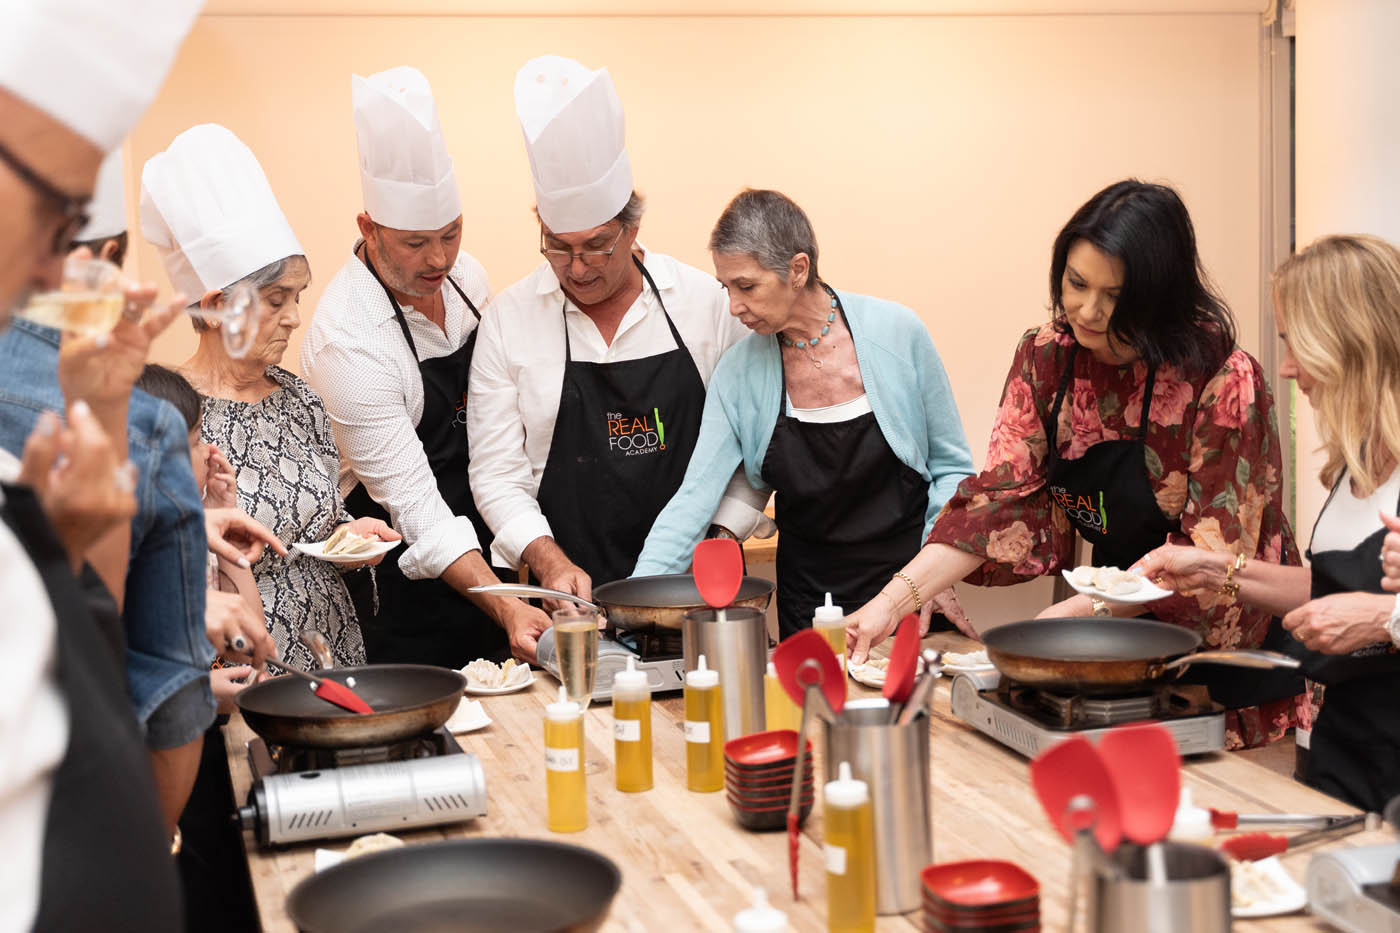 A group of team members cooking their meal led by our The Real Food Academy chef, check out our corporate party venues in Miami, FL.